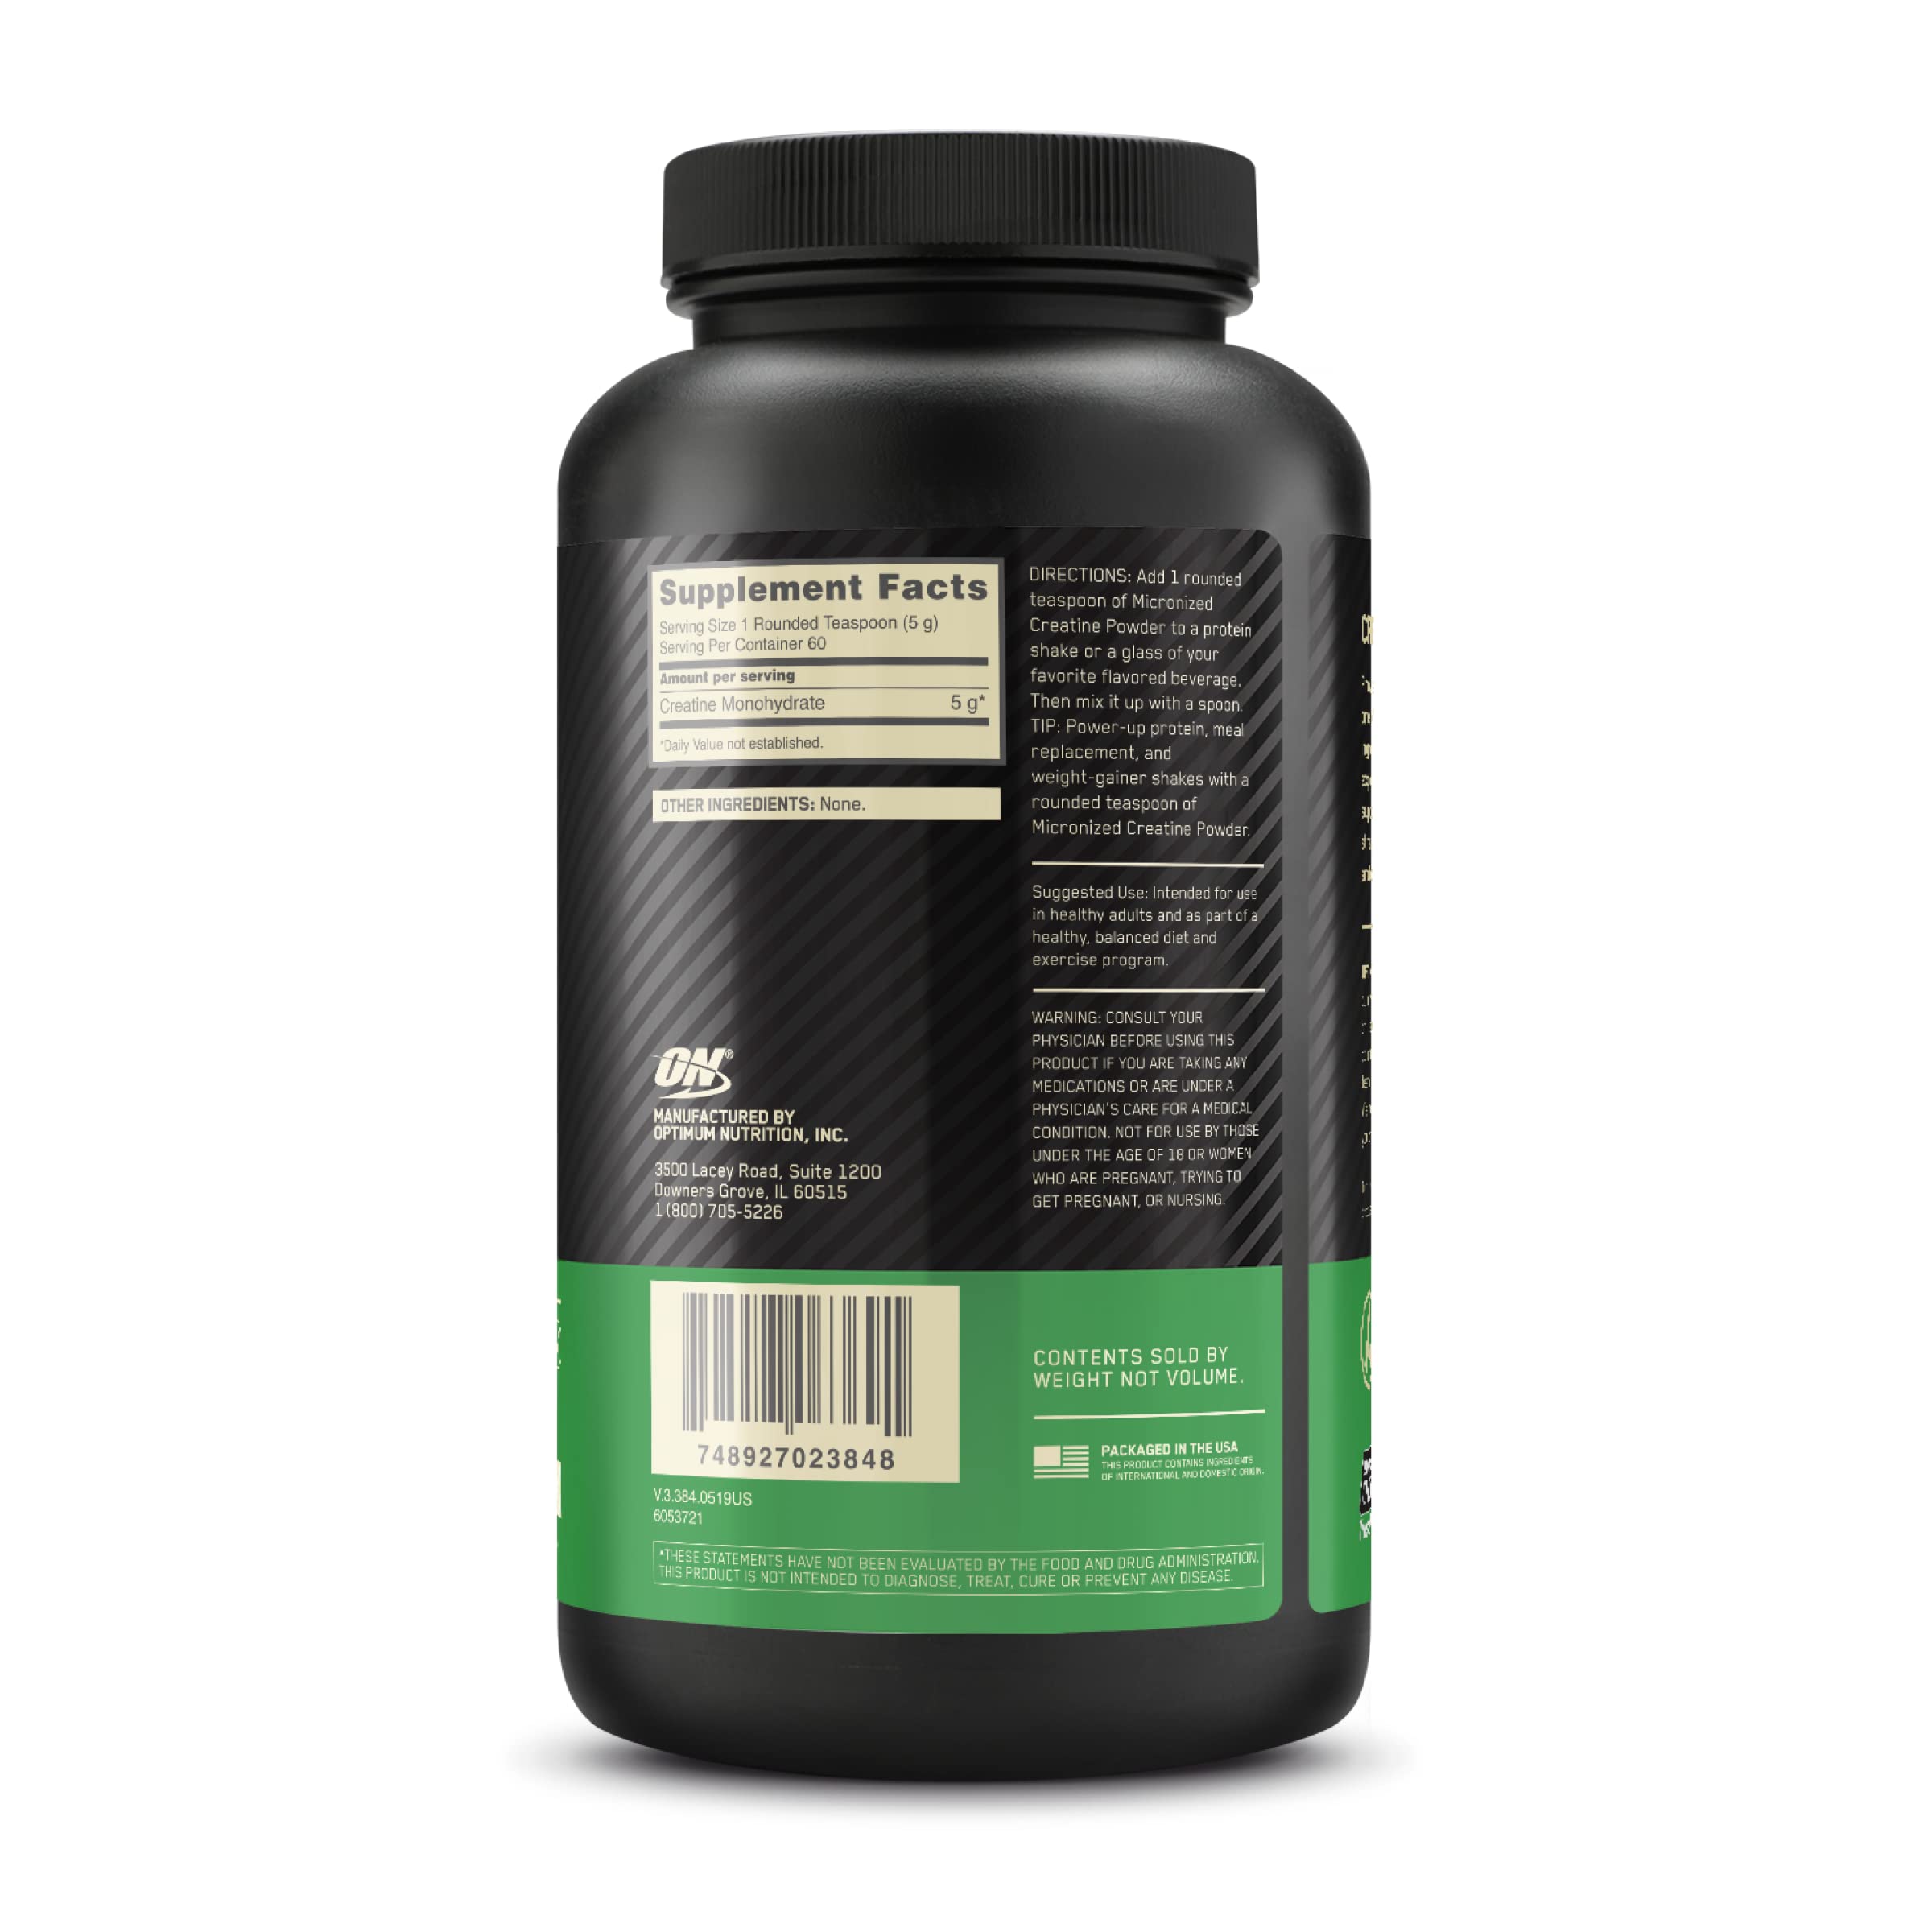 Optimum Nutrition Micronized Creatine Monohydrate Powder, Unflavored, Keto Friendly, 60 Servings (Packaging May Vary)